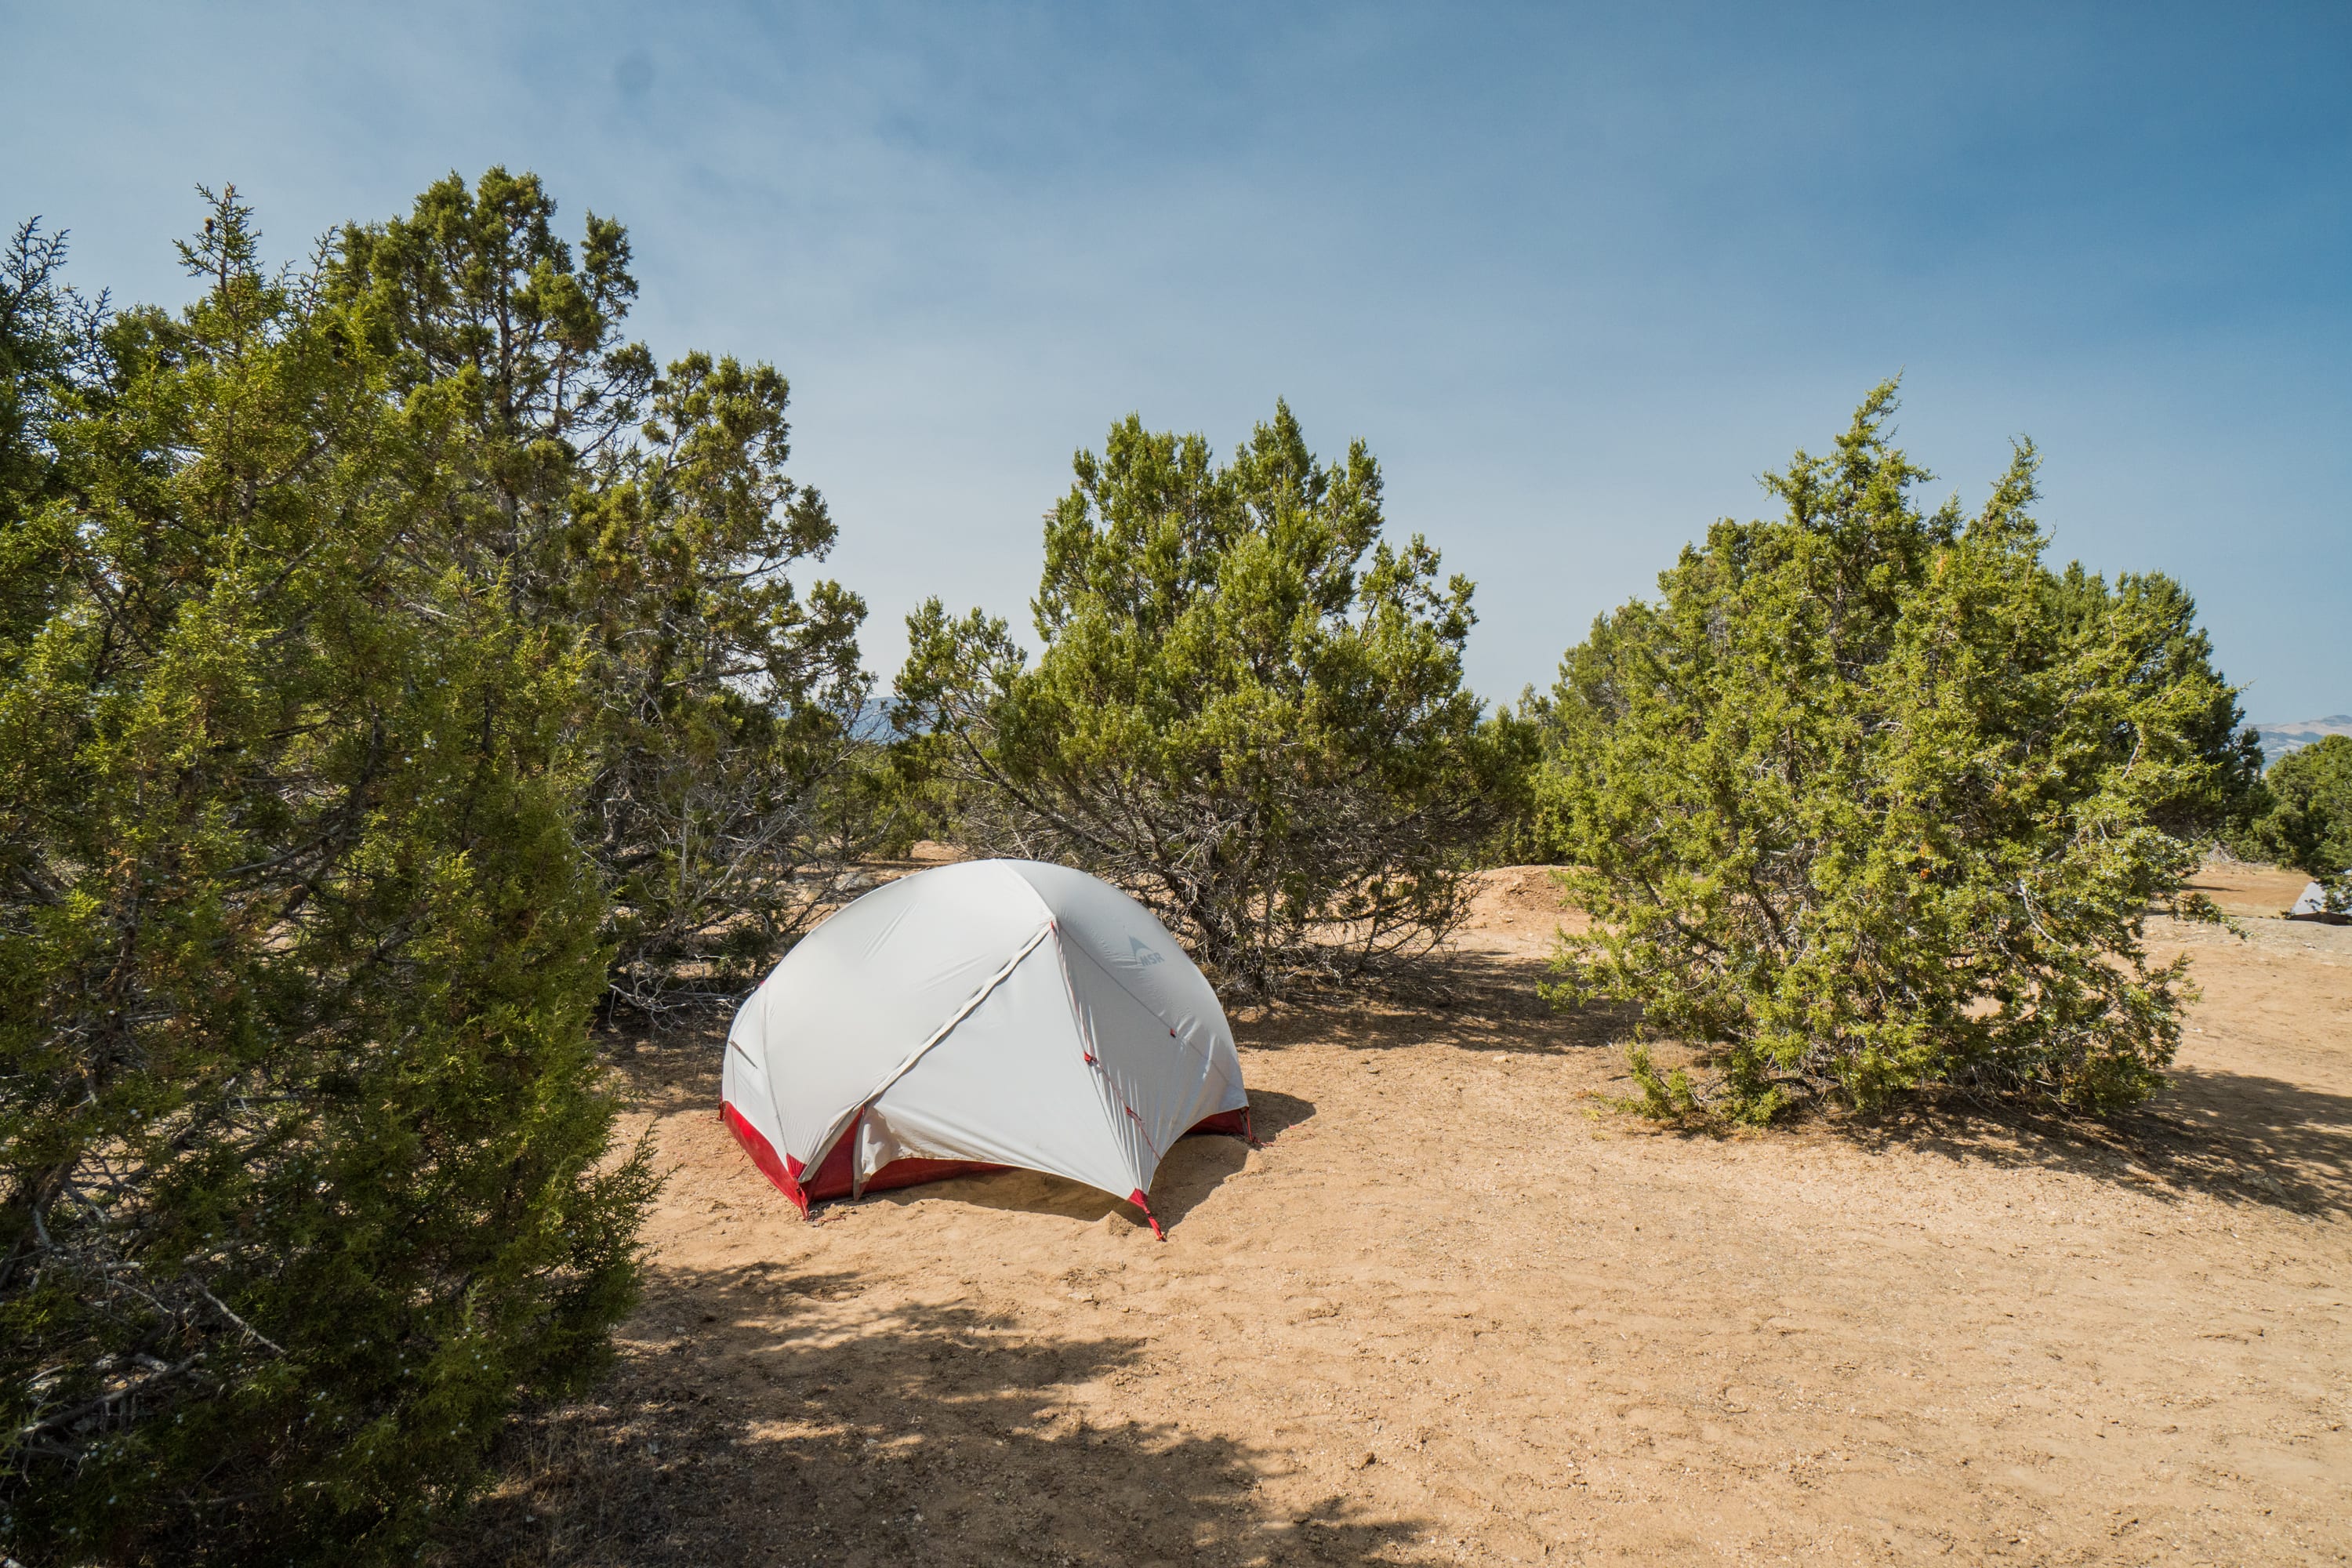 Several great spots to pitch your tents.